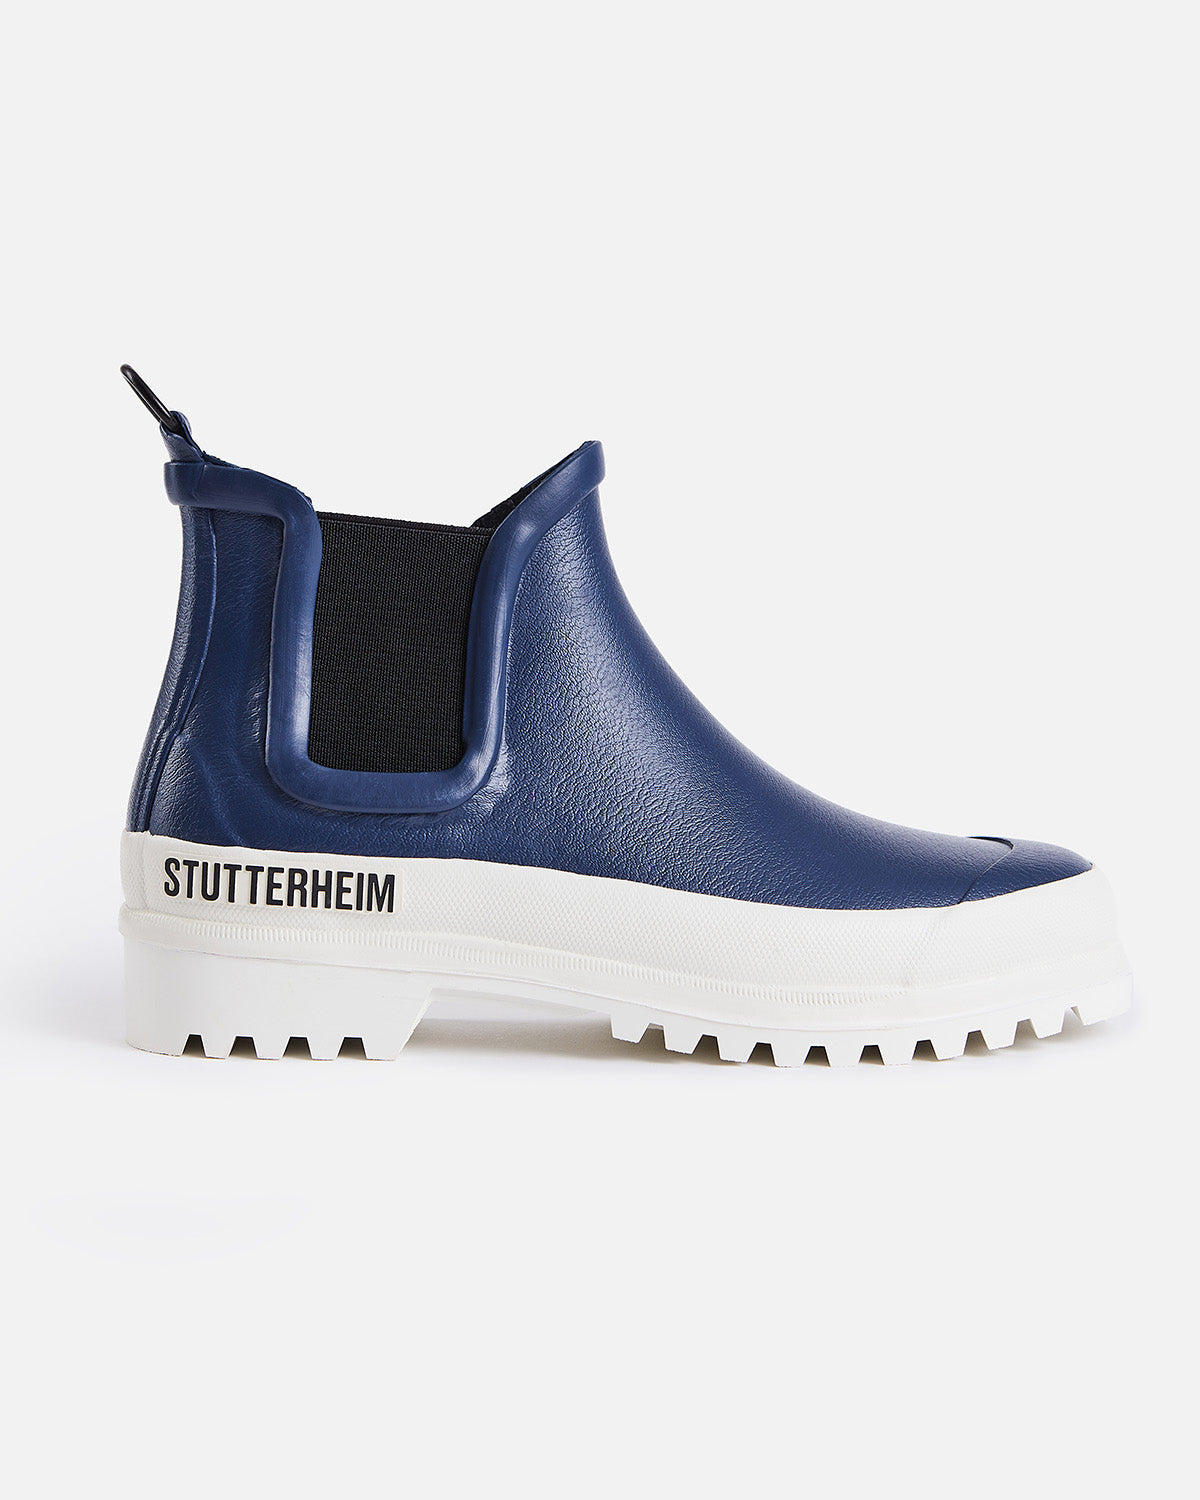 Chelsea Rainboots in color navy with white sole by Ilse Jacobsen